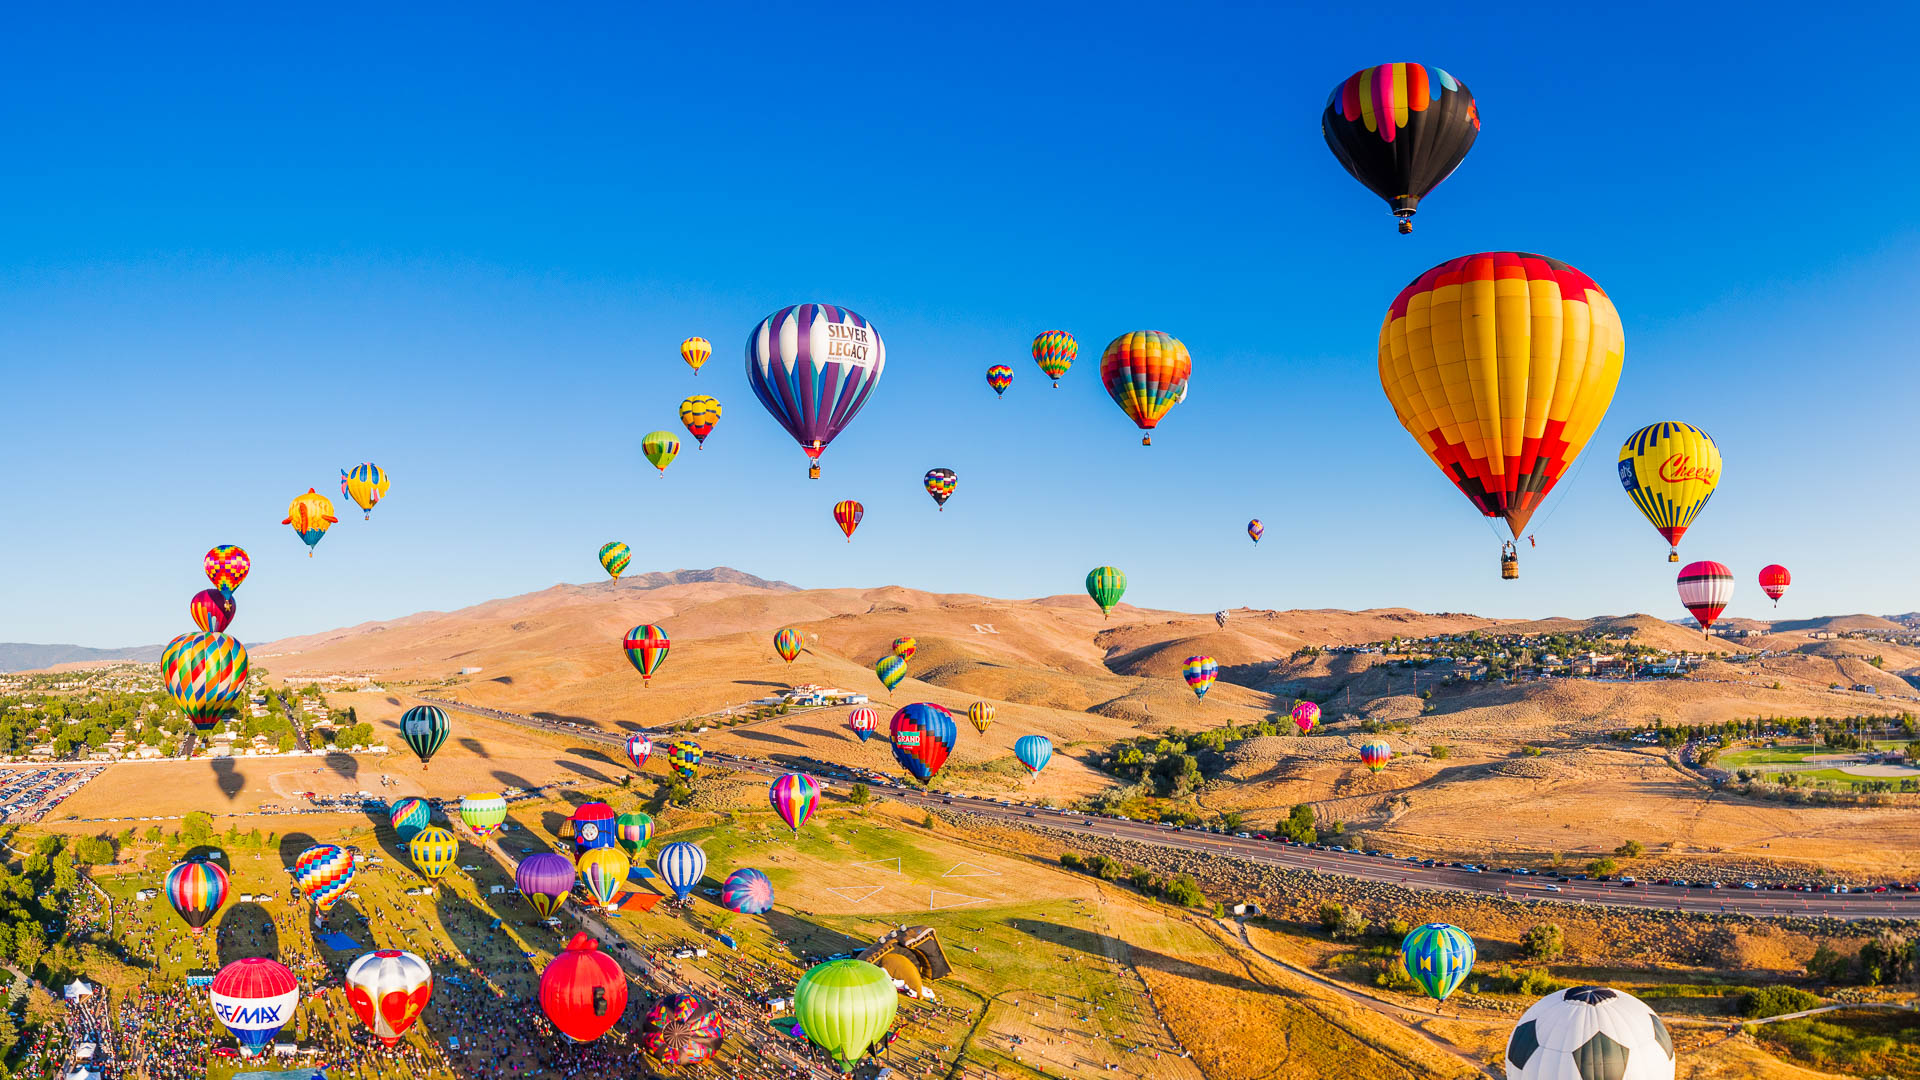 The Great Reno Balloon Race A race to the top (sponsored)